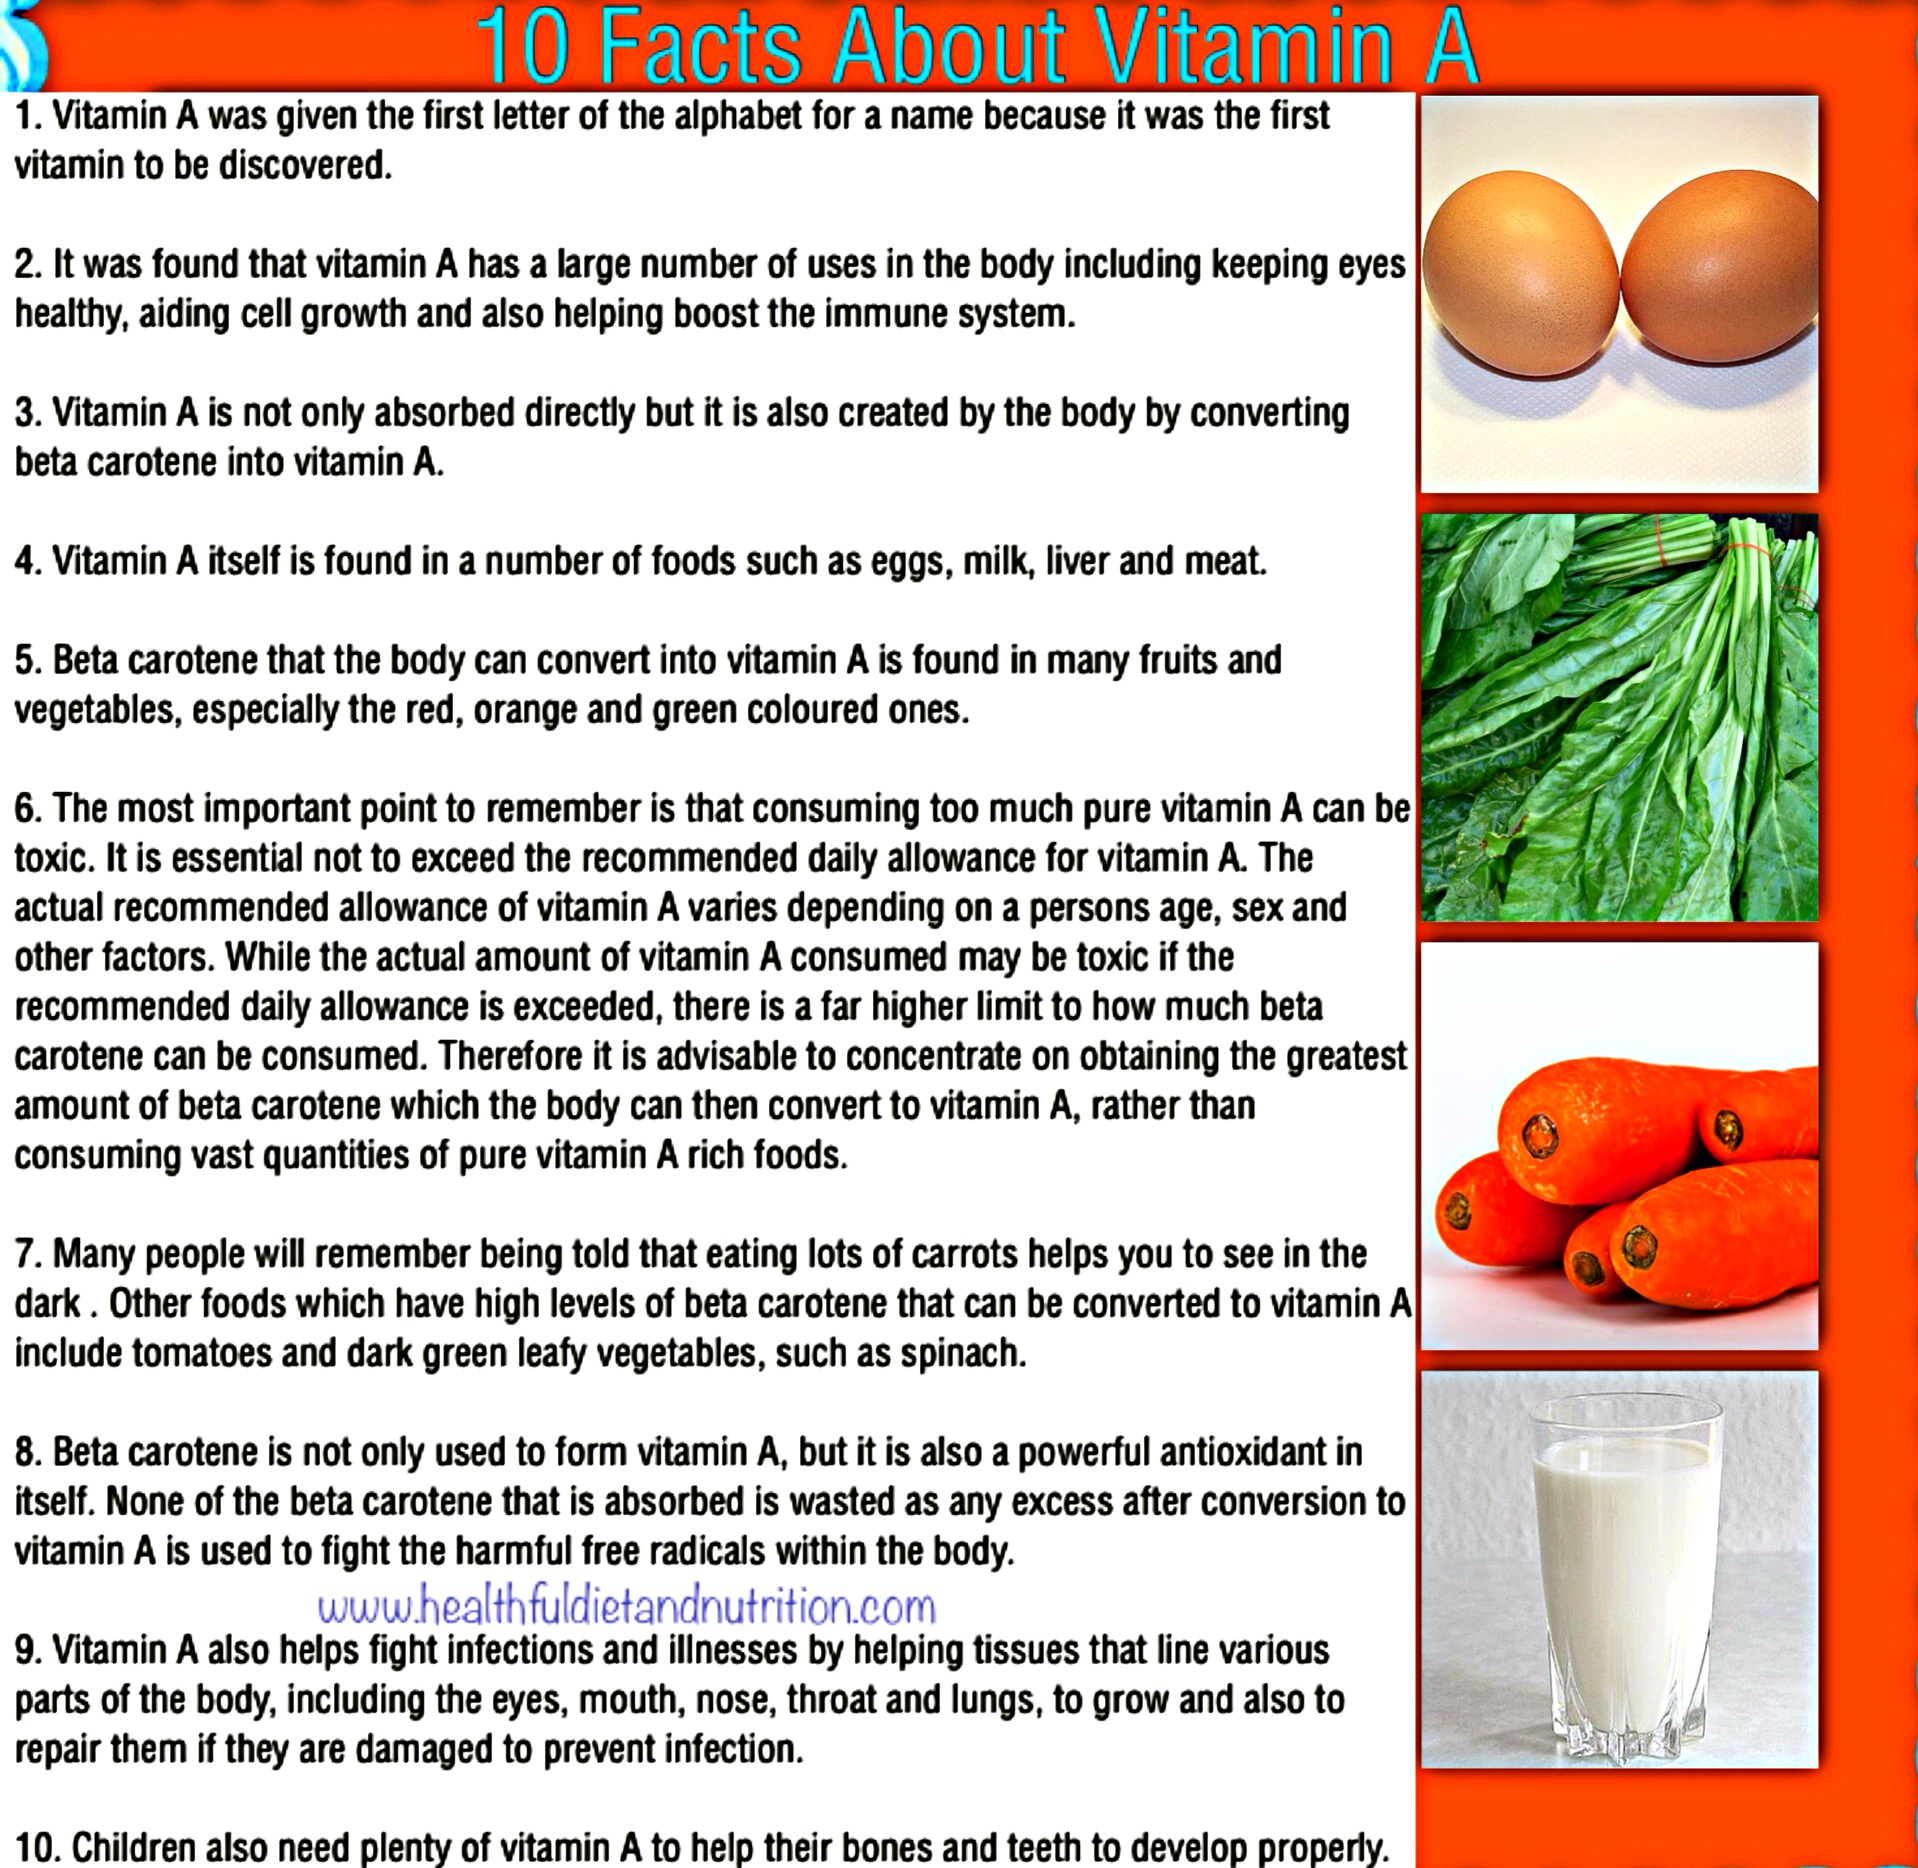 10 Facts About Vitamin A